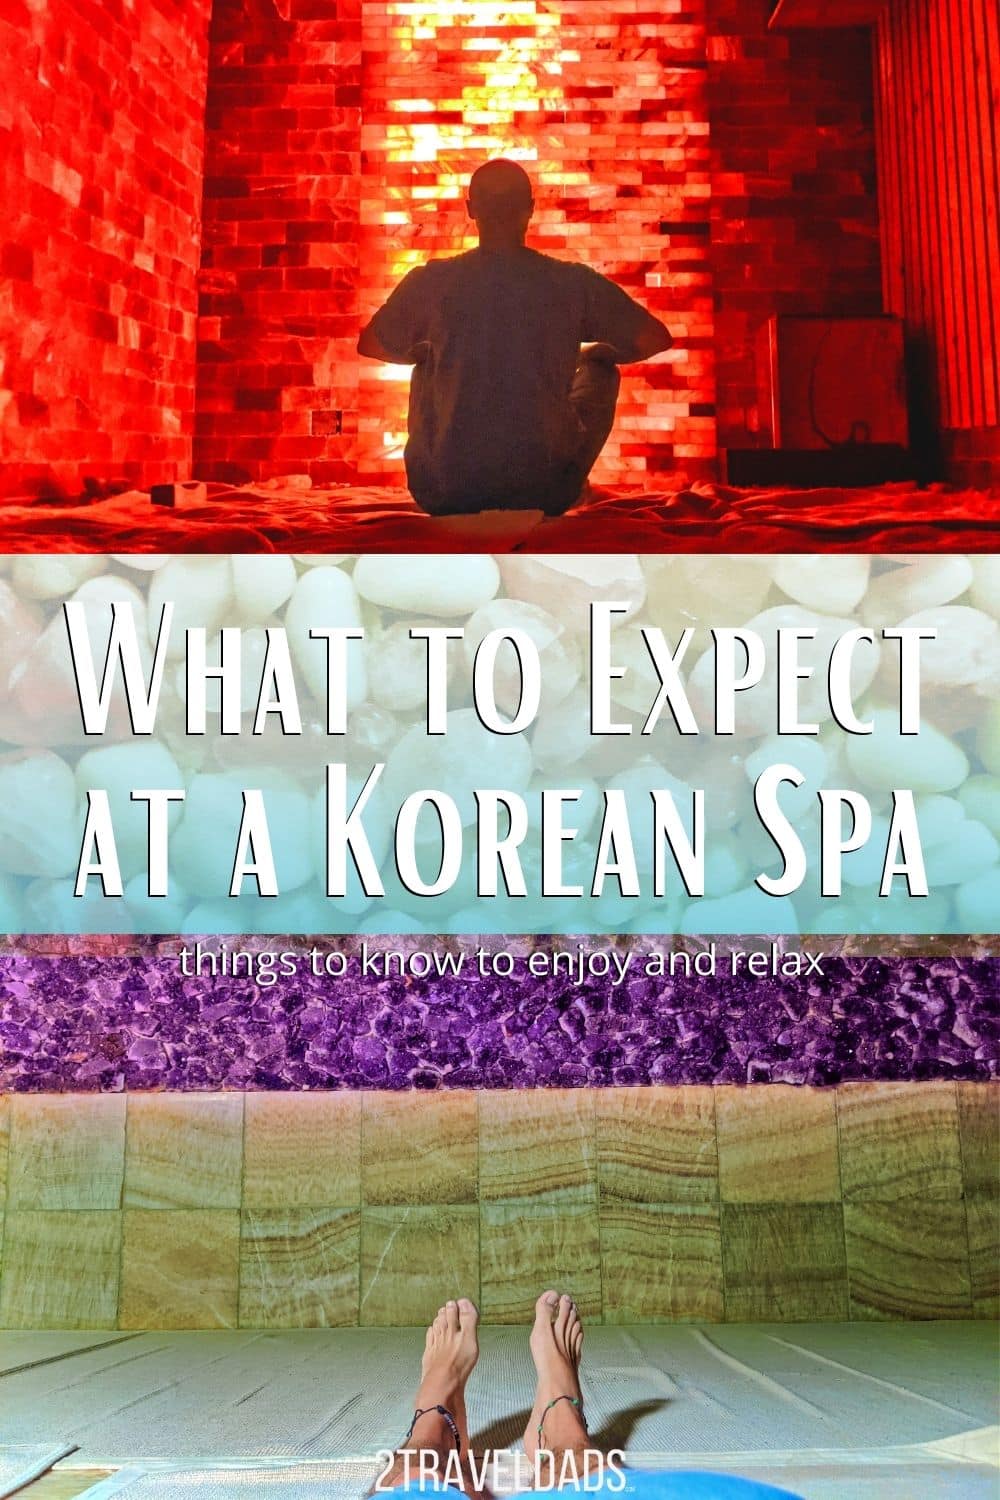 What to expect at a Korean Spa, from the atmosphere to the very intimate, rather uncomfortable moments. Tips for enjoying the experience and relaxing through a unique spa experience.